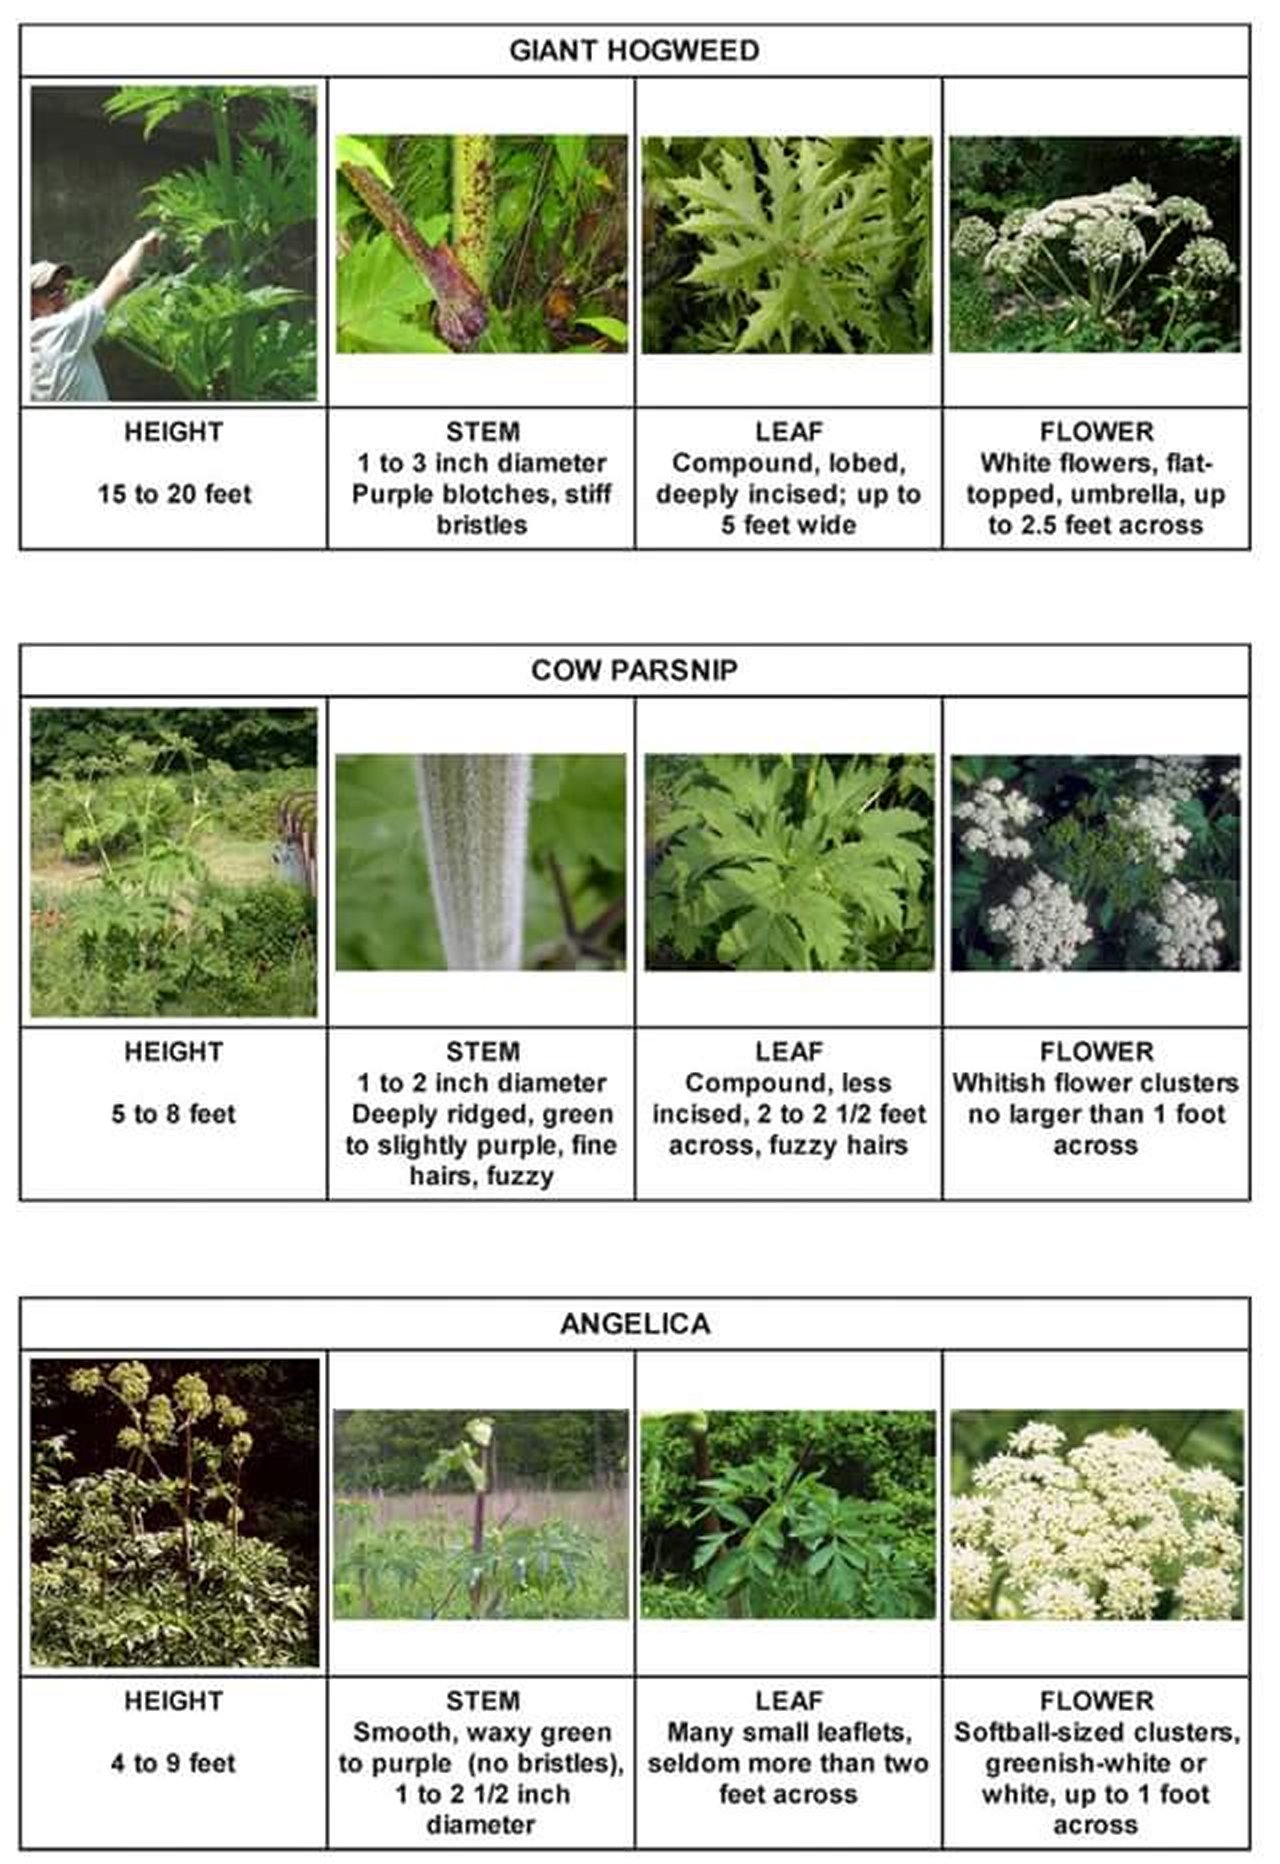 How to tell the difference between Hogweed, Cow Parsnip and Angelica.